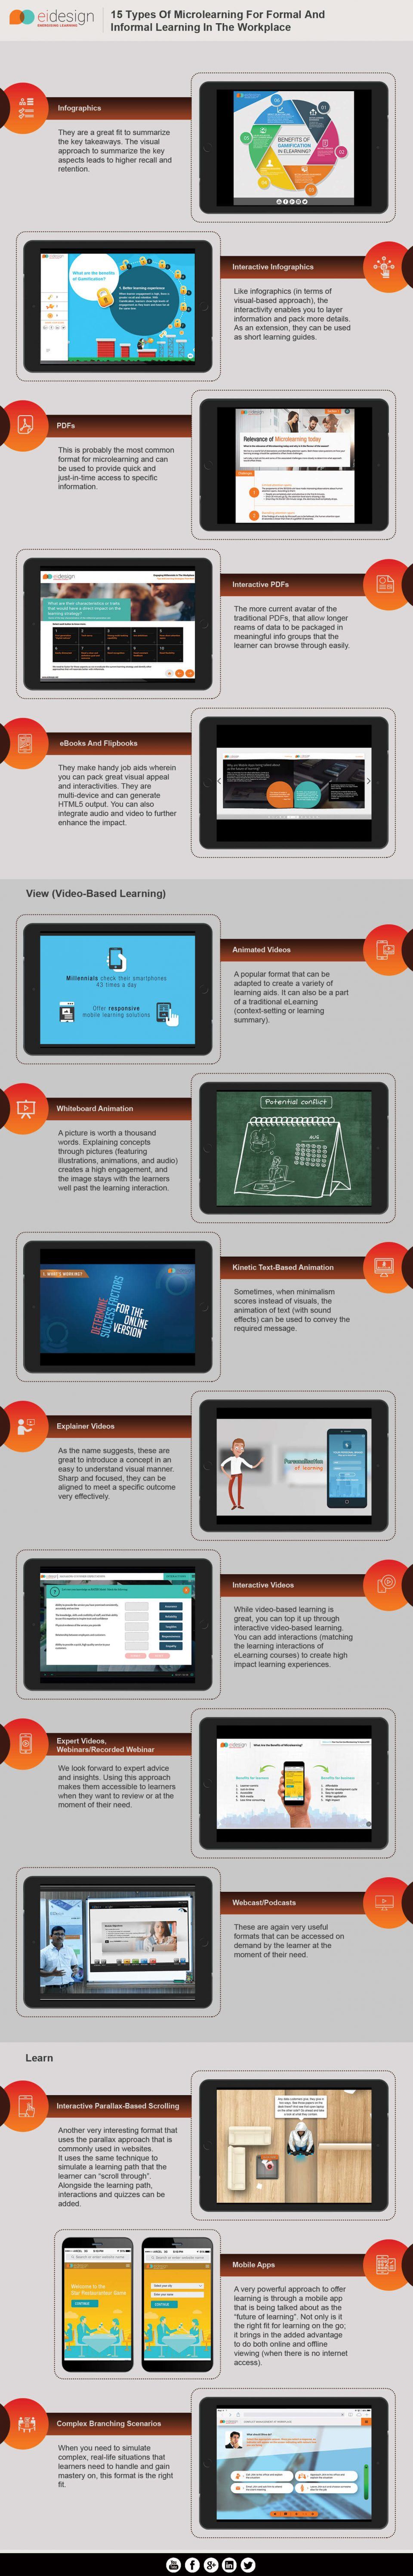 Microlearning In The Workplace – 15 Amazing Examples To Make Your Training Exciting Infographic